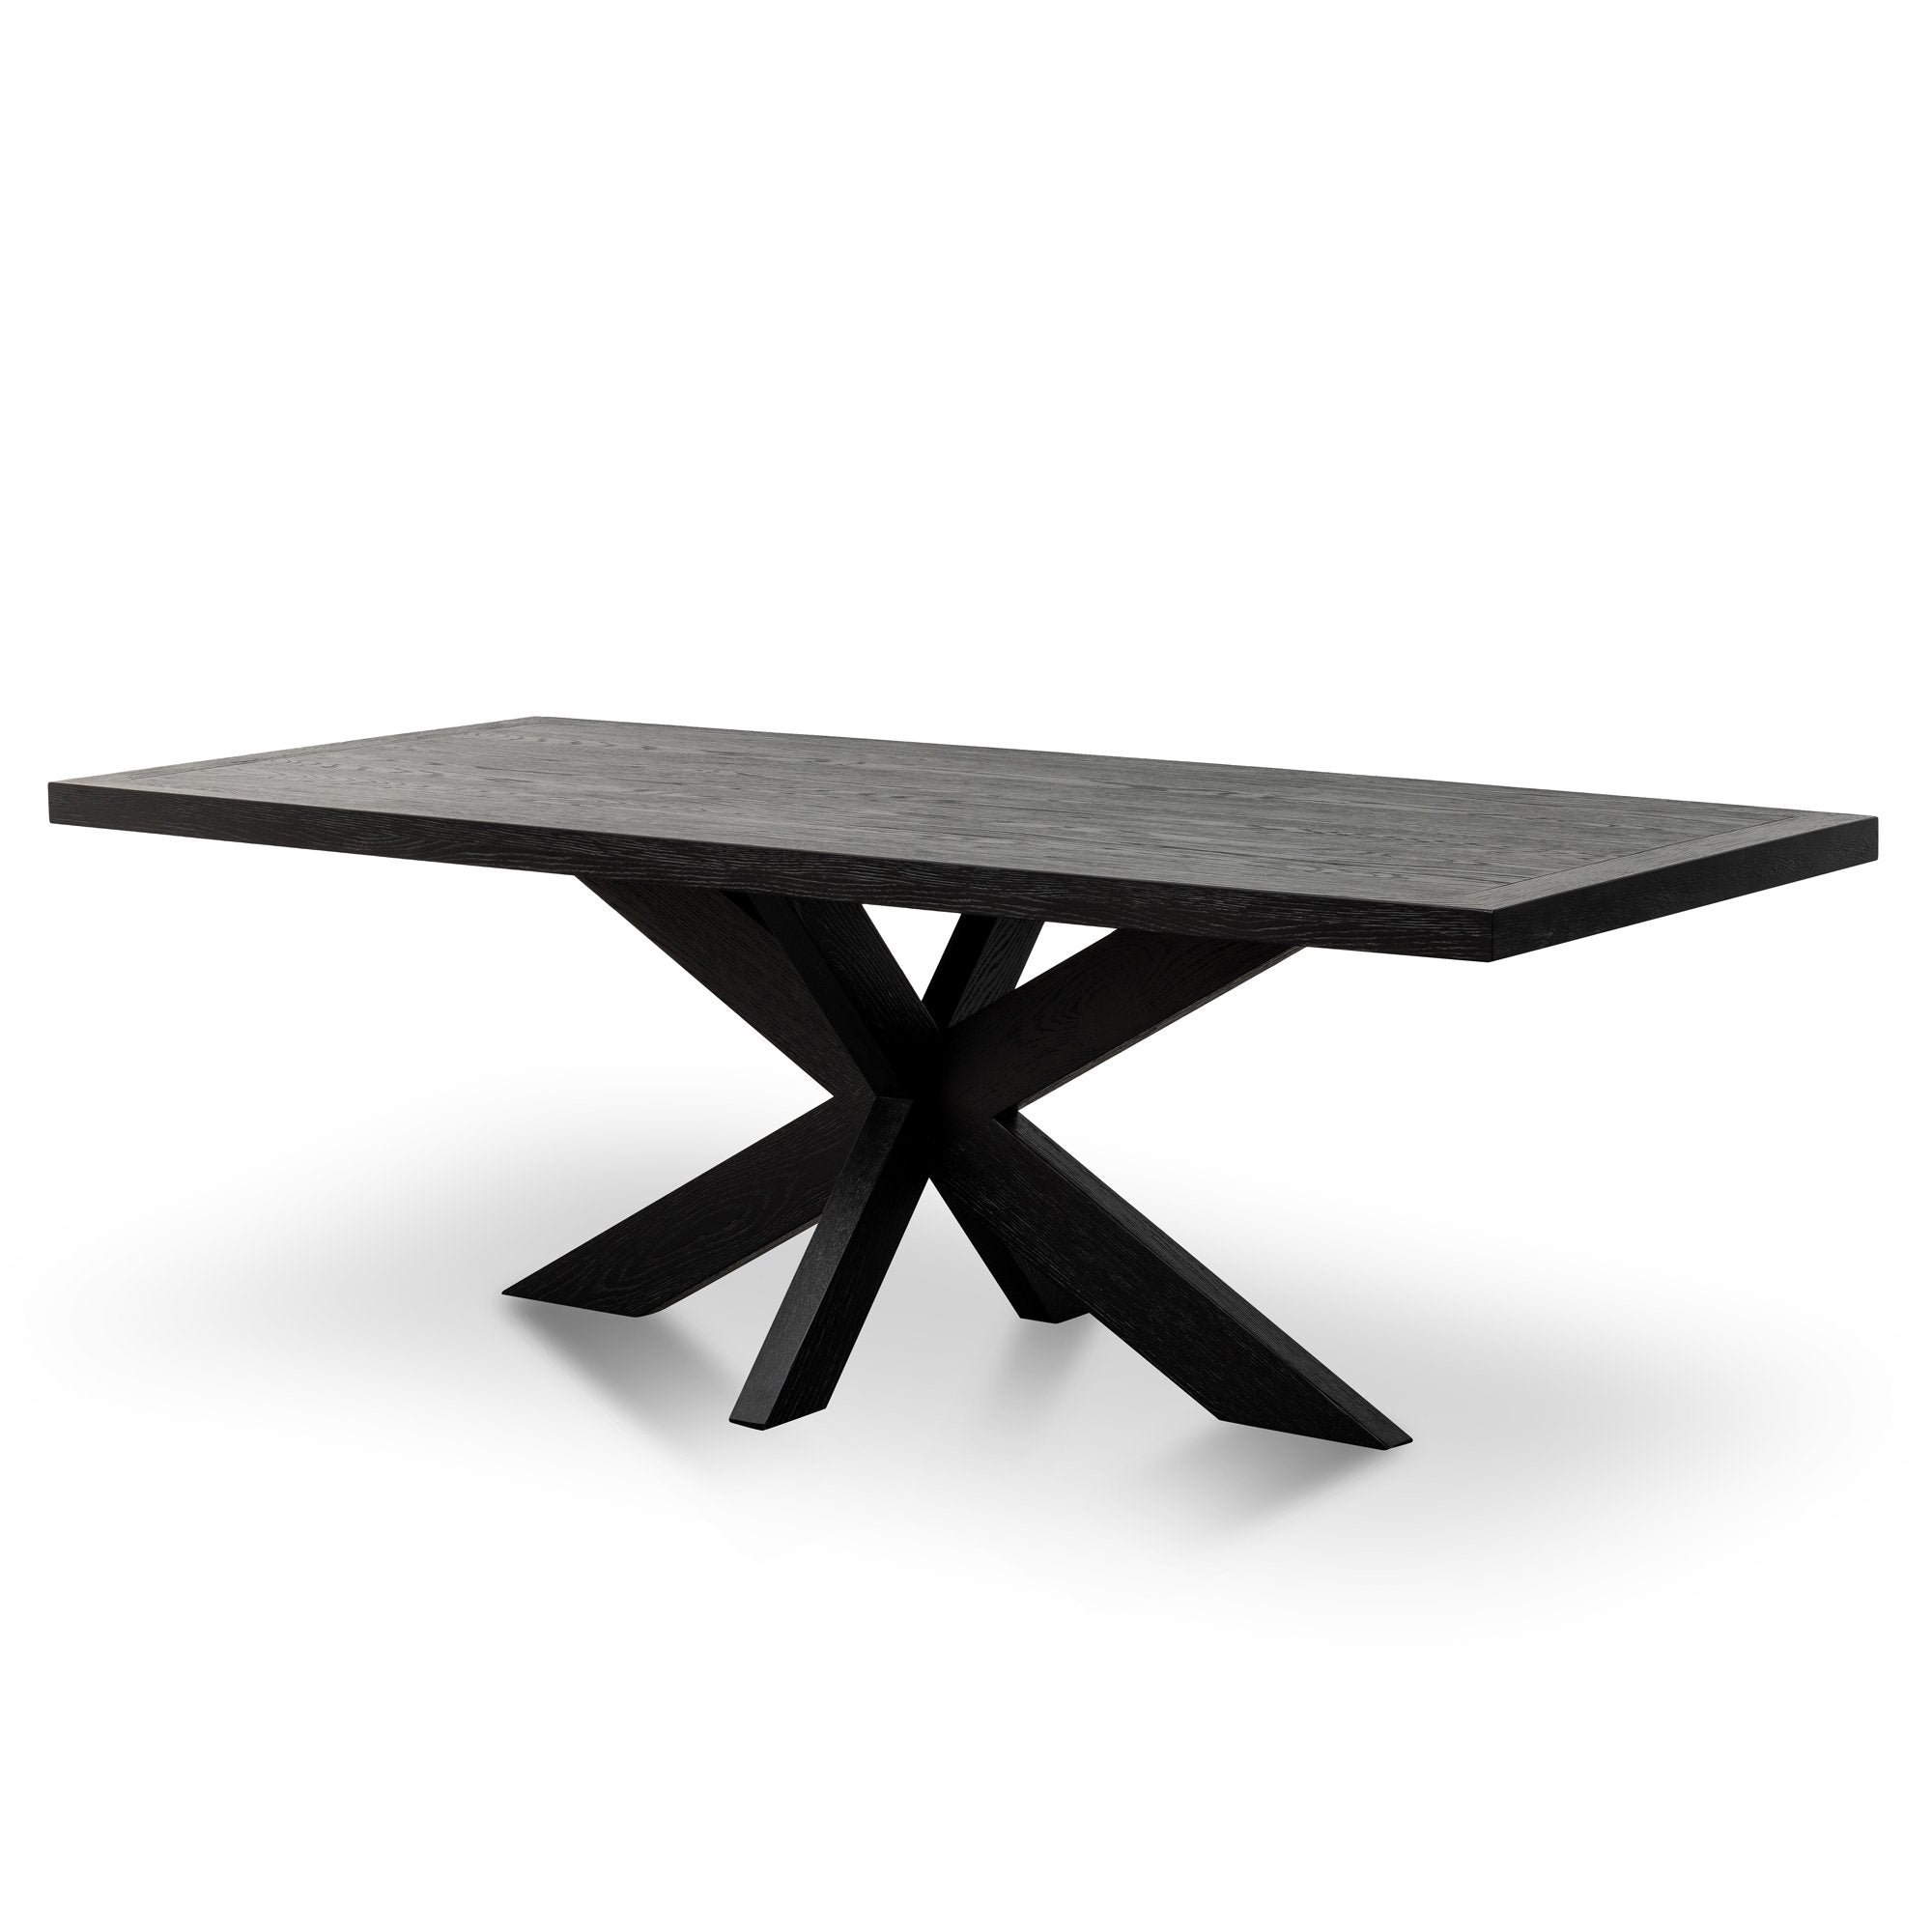 Amazon 2.2m Wooden Dining Table - Full Black - Dining Tables